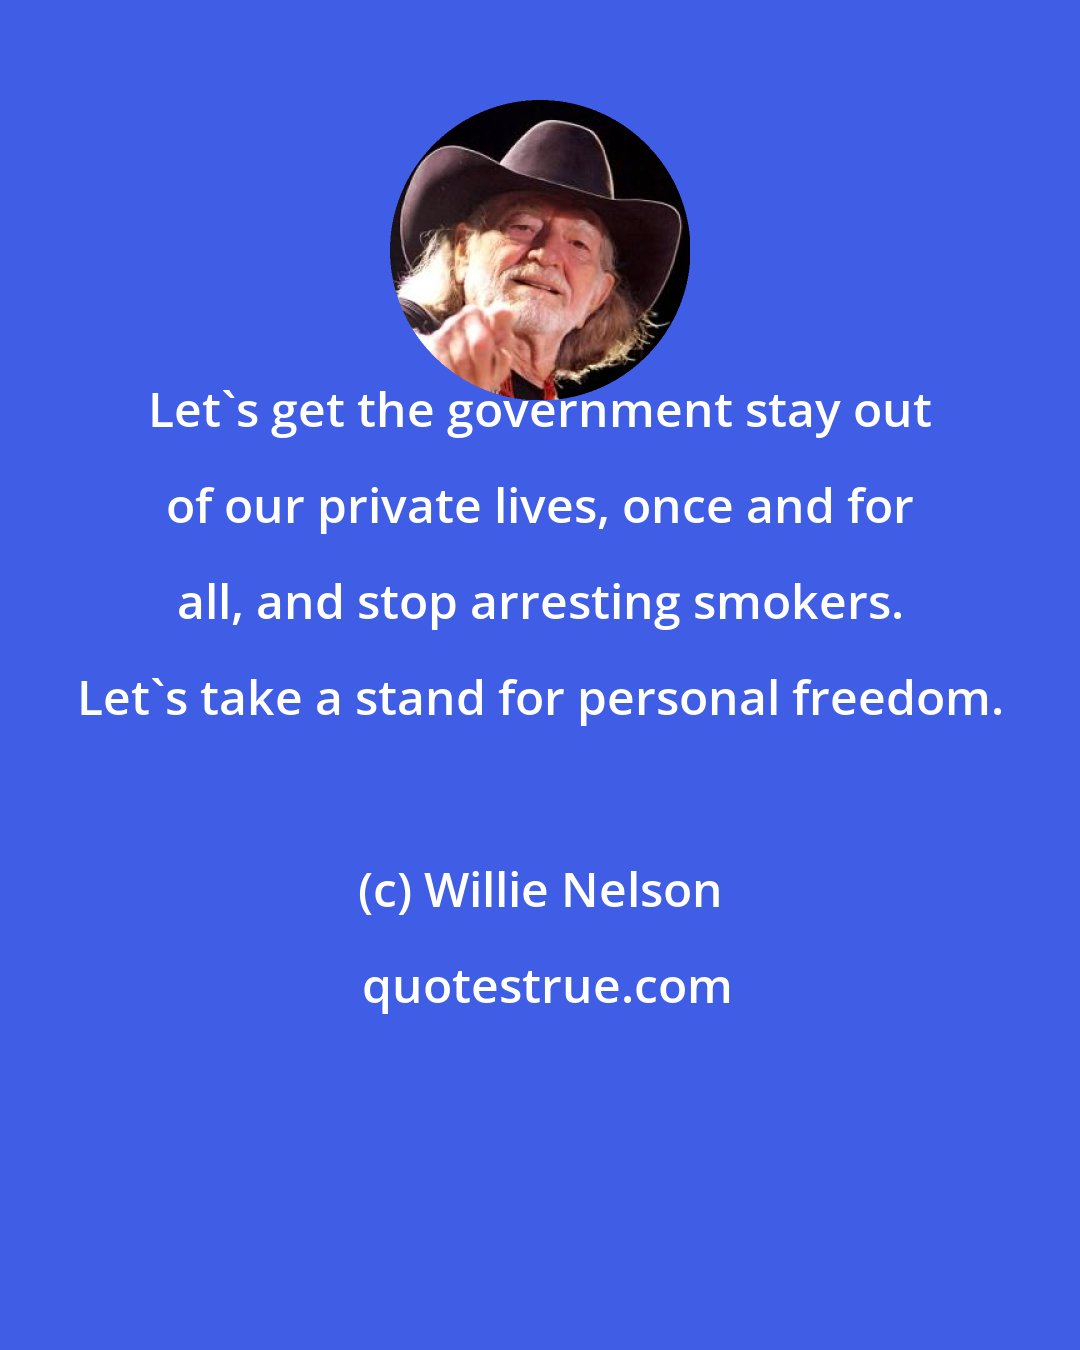 Willie Nelson: Let's get the government stay out of our private lives, once and for all, and stop arresting smokers. Let's take a stand for personal freedom.